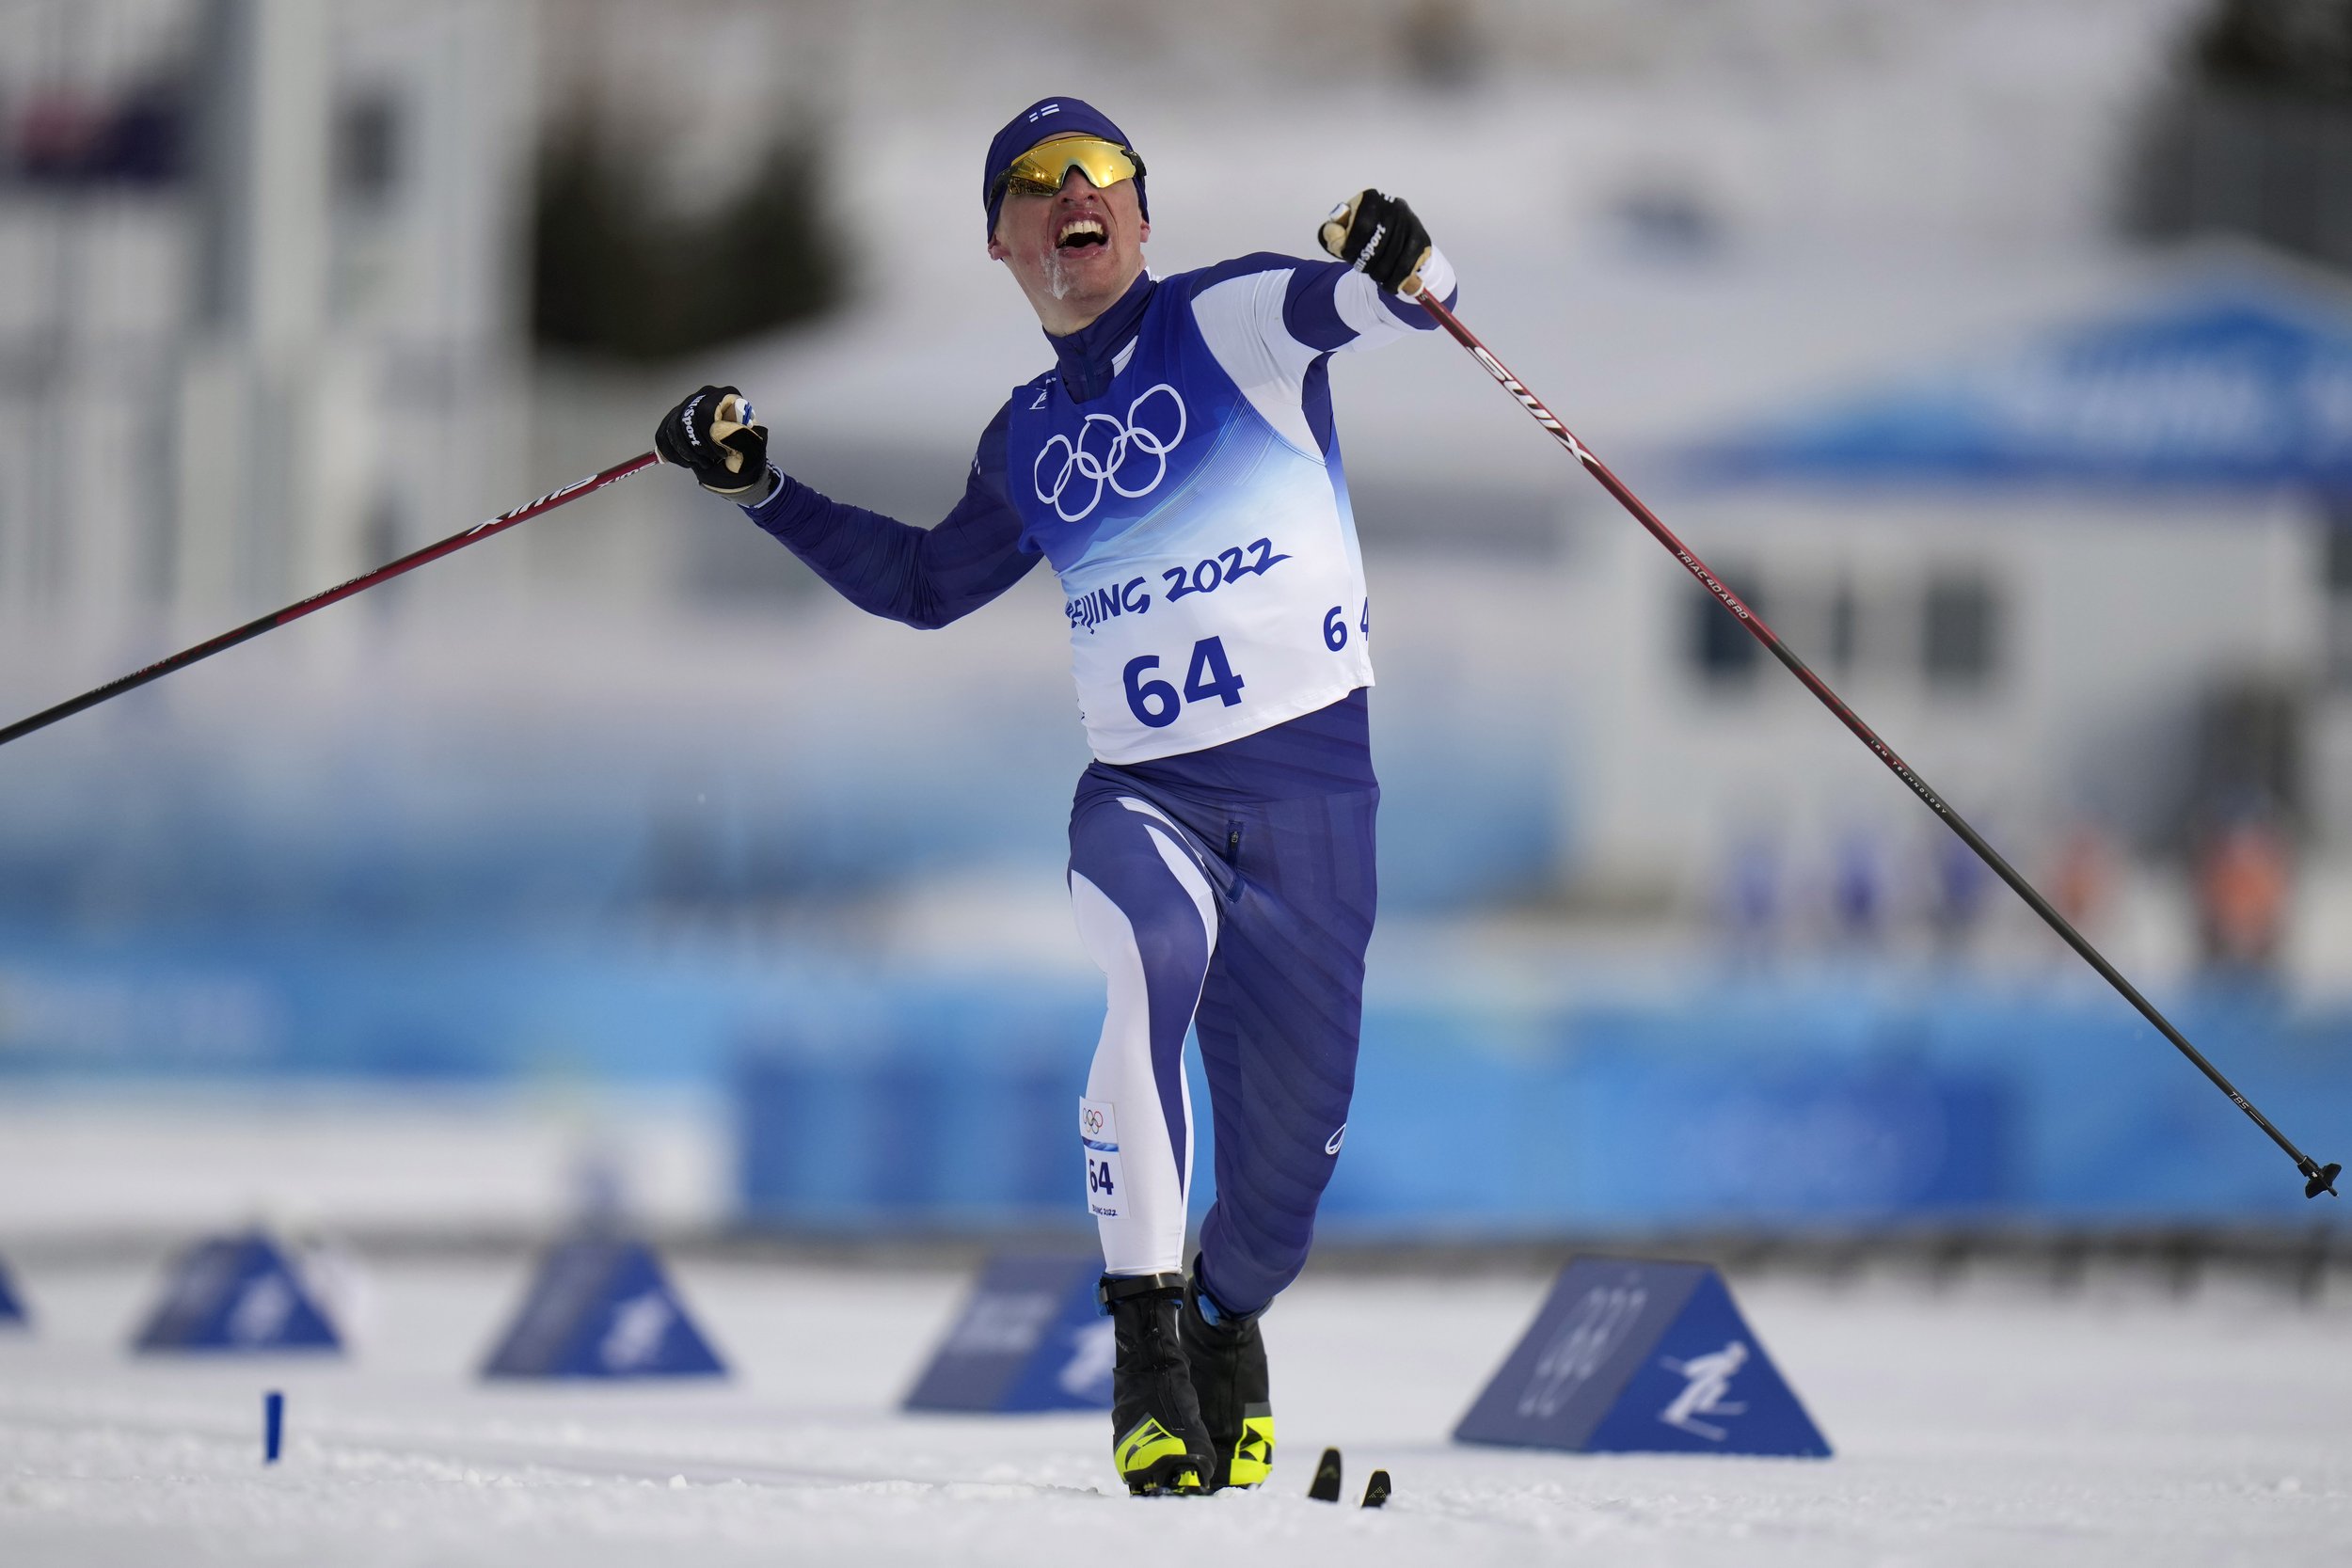  Iivo Niskanen, of Finland, celebrates as he crosses the finish line during the men's 15km classic cross-country skiing competition at the 2022 Winter Olympics, Friday, Feb. 11, 2022, in Zhangjiakou, China. (AP Photo/Alessandra Tarantino) 